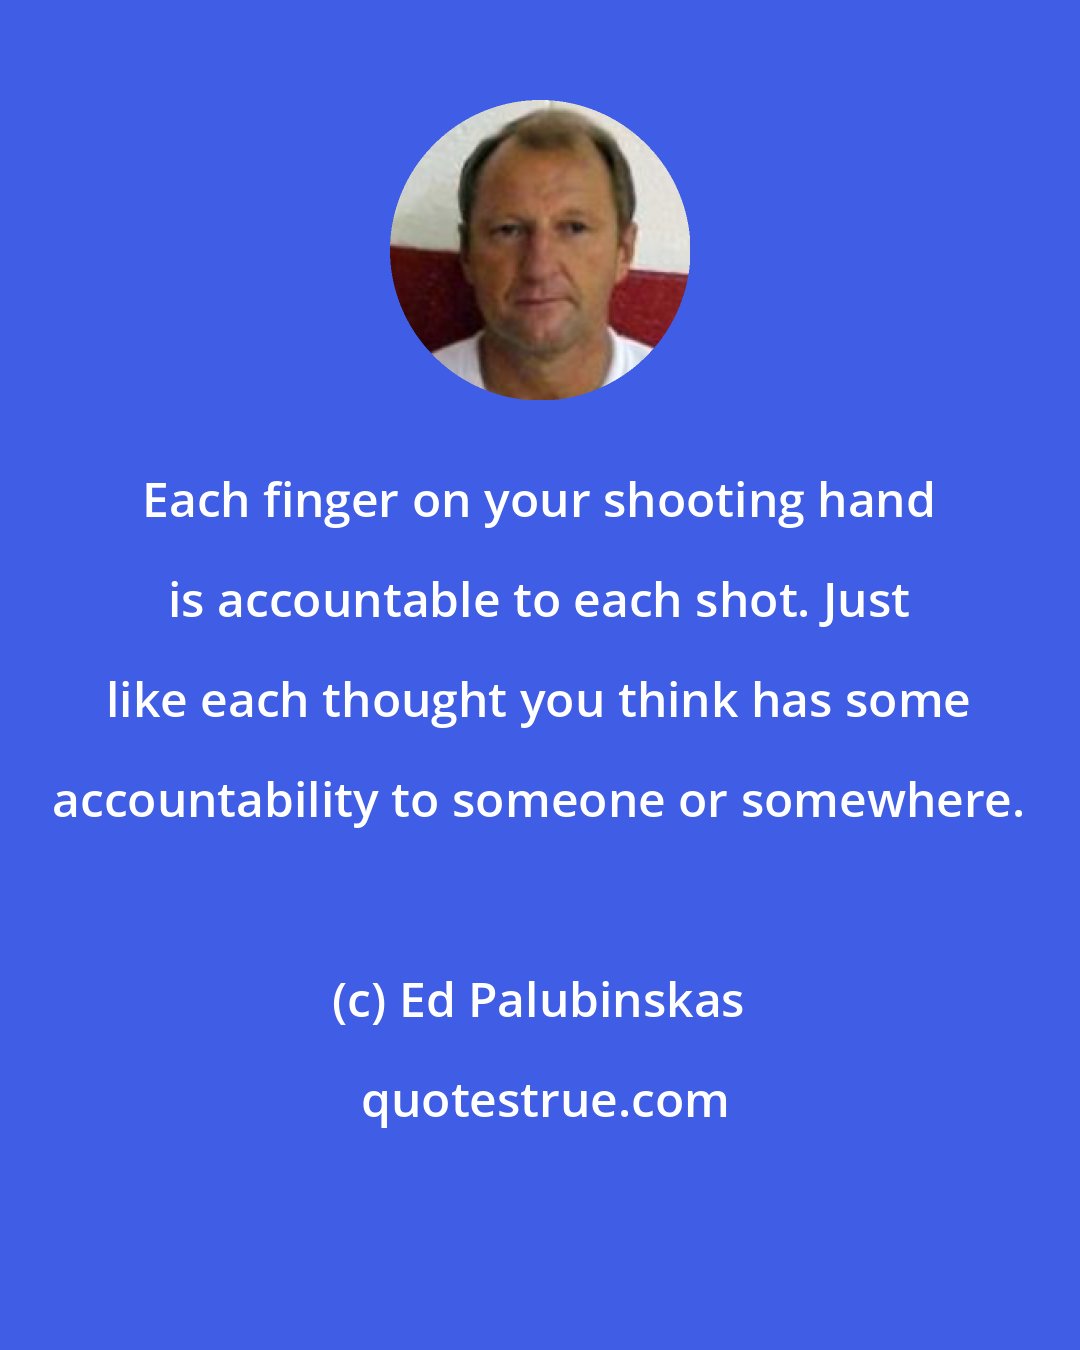 Ed Palubinskas: Each finger on your shooting hand is accountable to each shot. Just like each thought you think has some accountability to someone or somewhere.